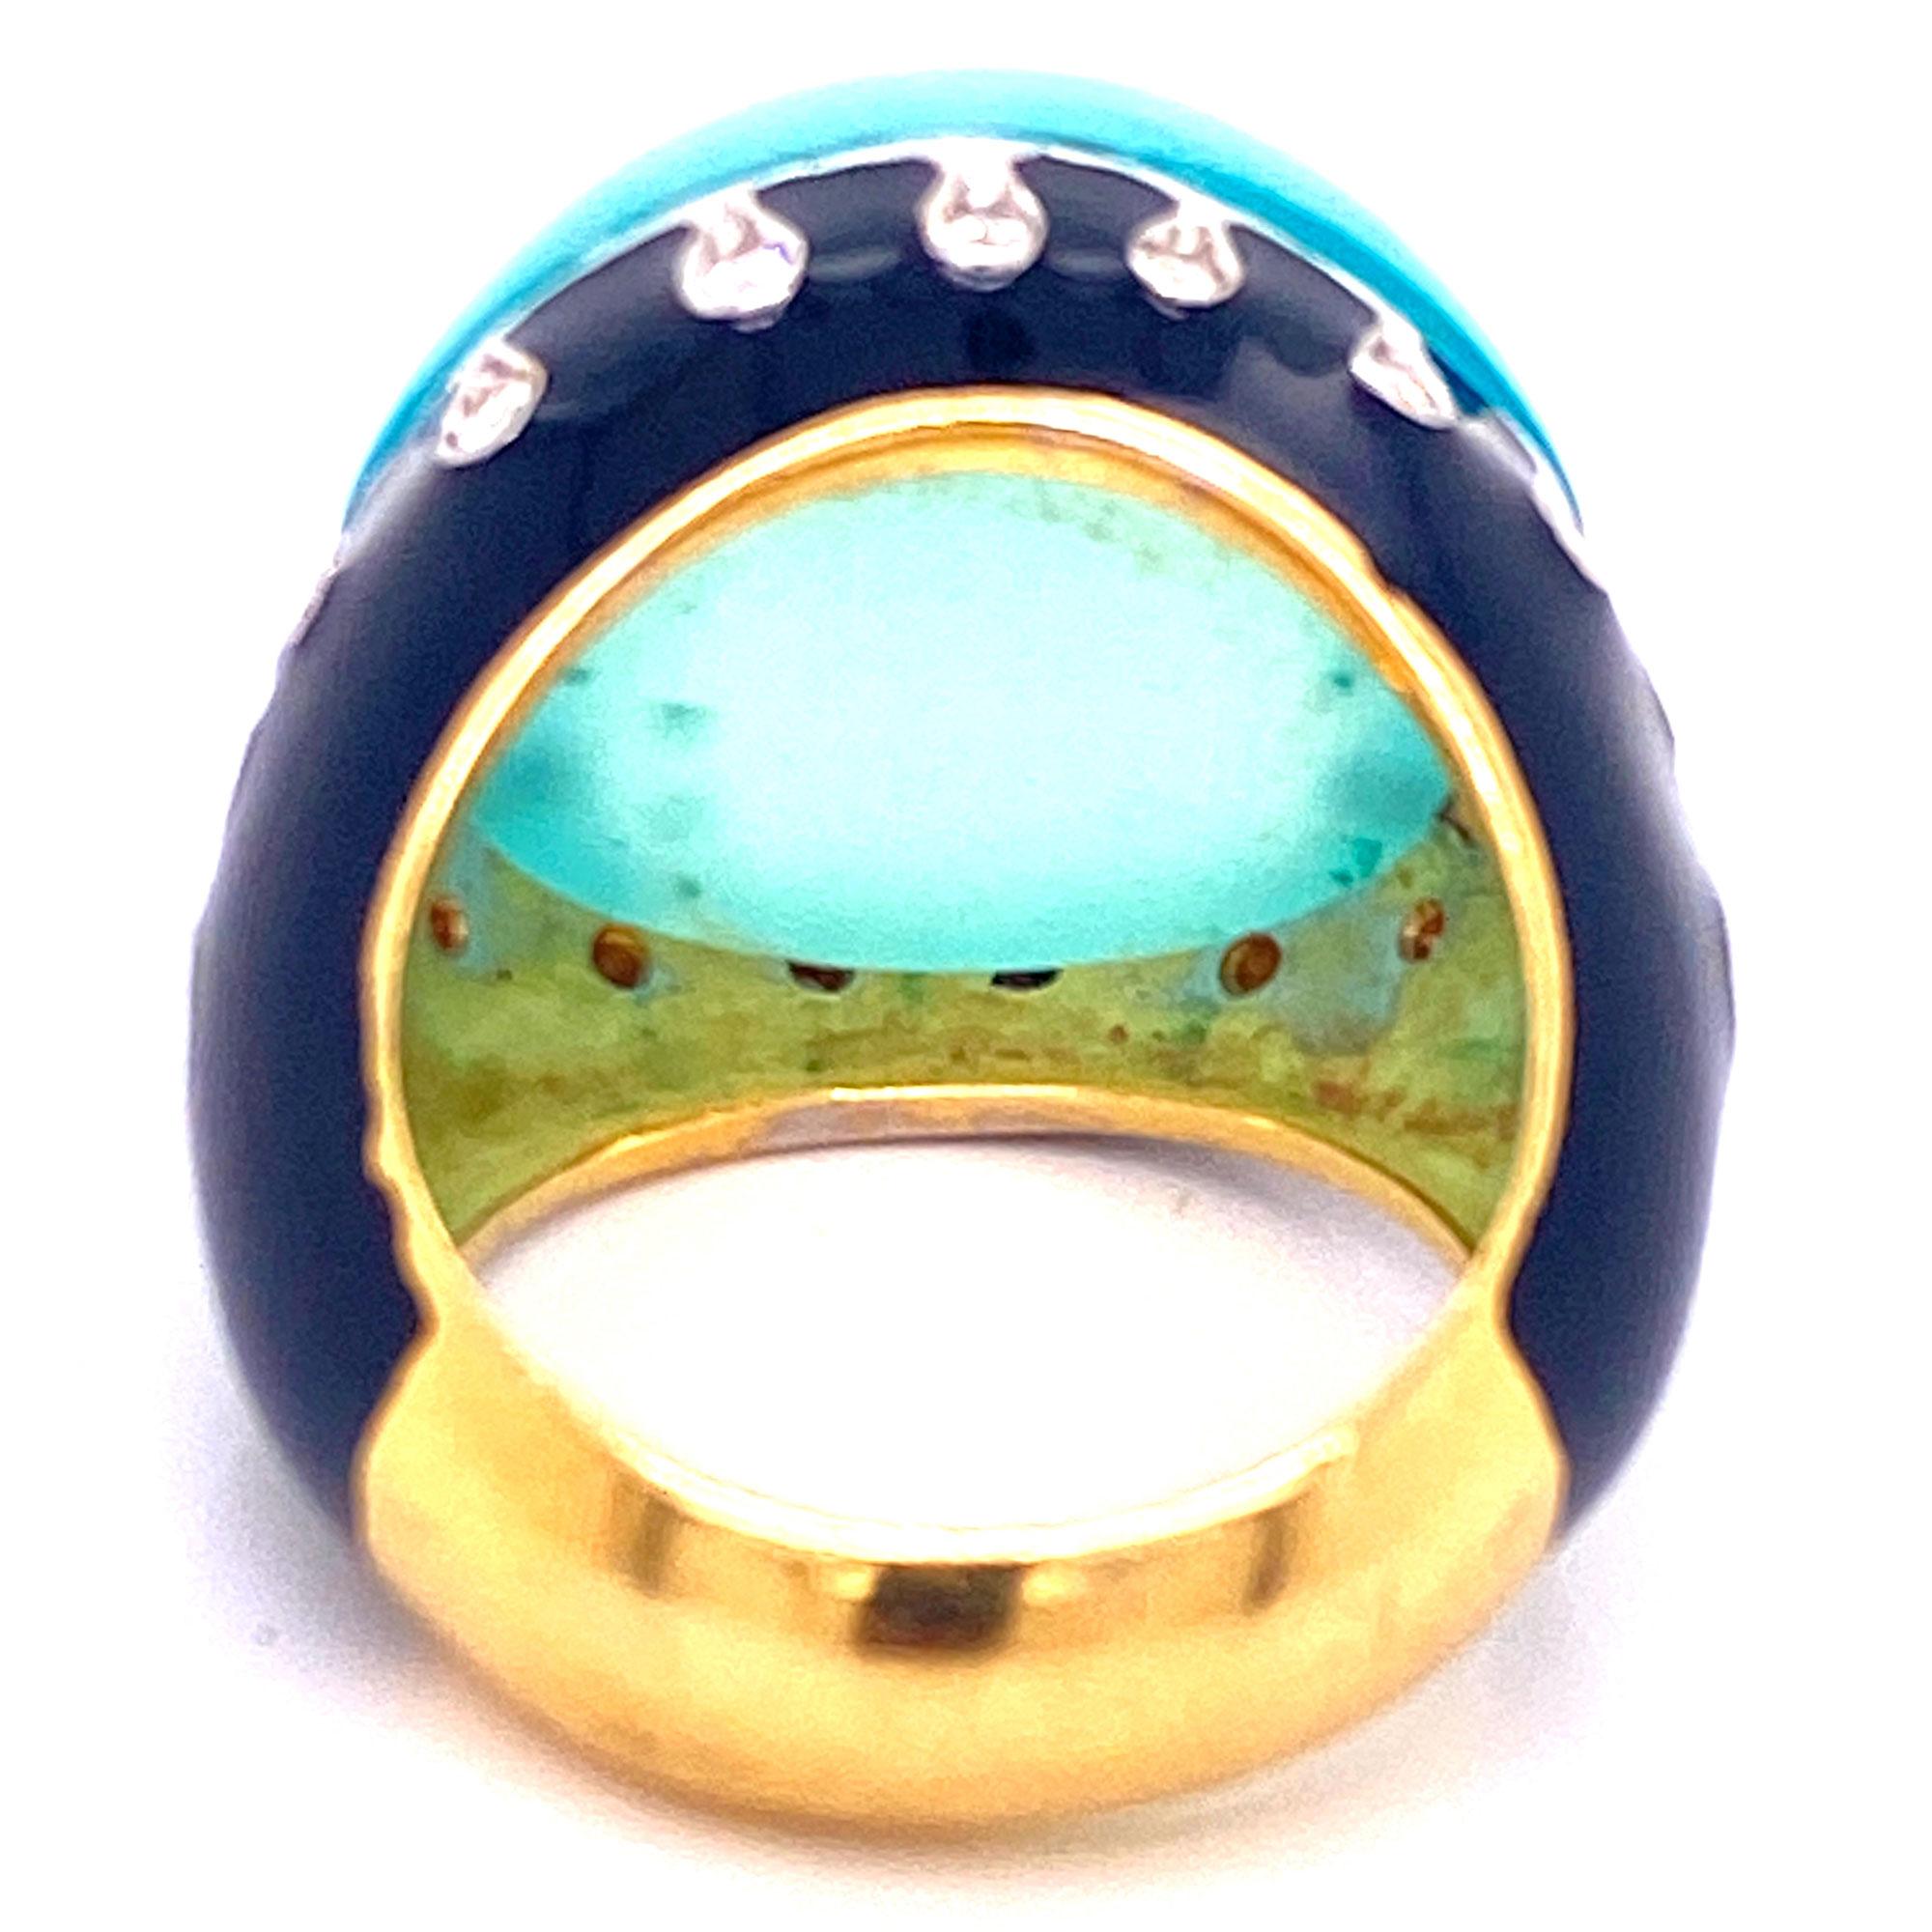 Fabulous cocktail ring featuring a large cabochon chalcedony gemstone set in an 18 karat yellow gold mounting. The mounting is hand crafted with black enamel and round brilliant cut diamonds (.40 CTW). The ring is currently size 7 and the chalcedony